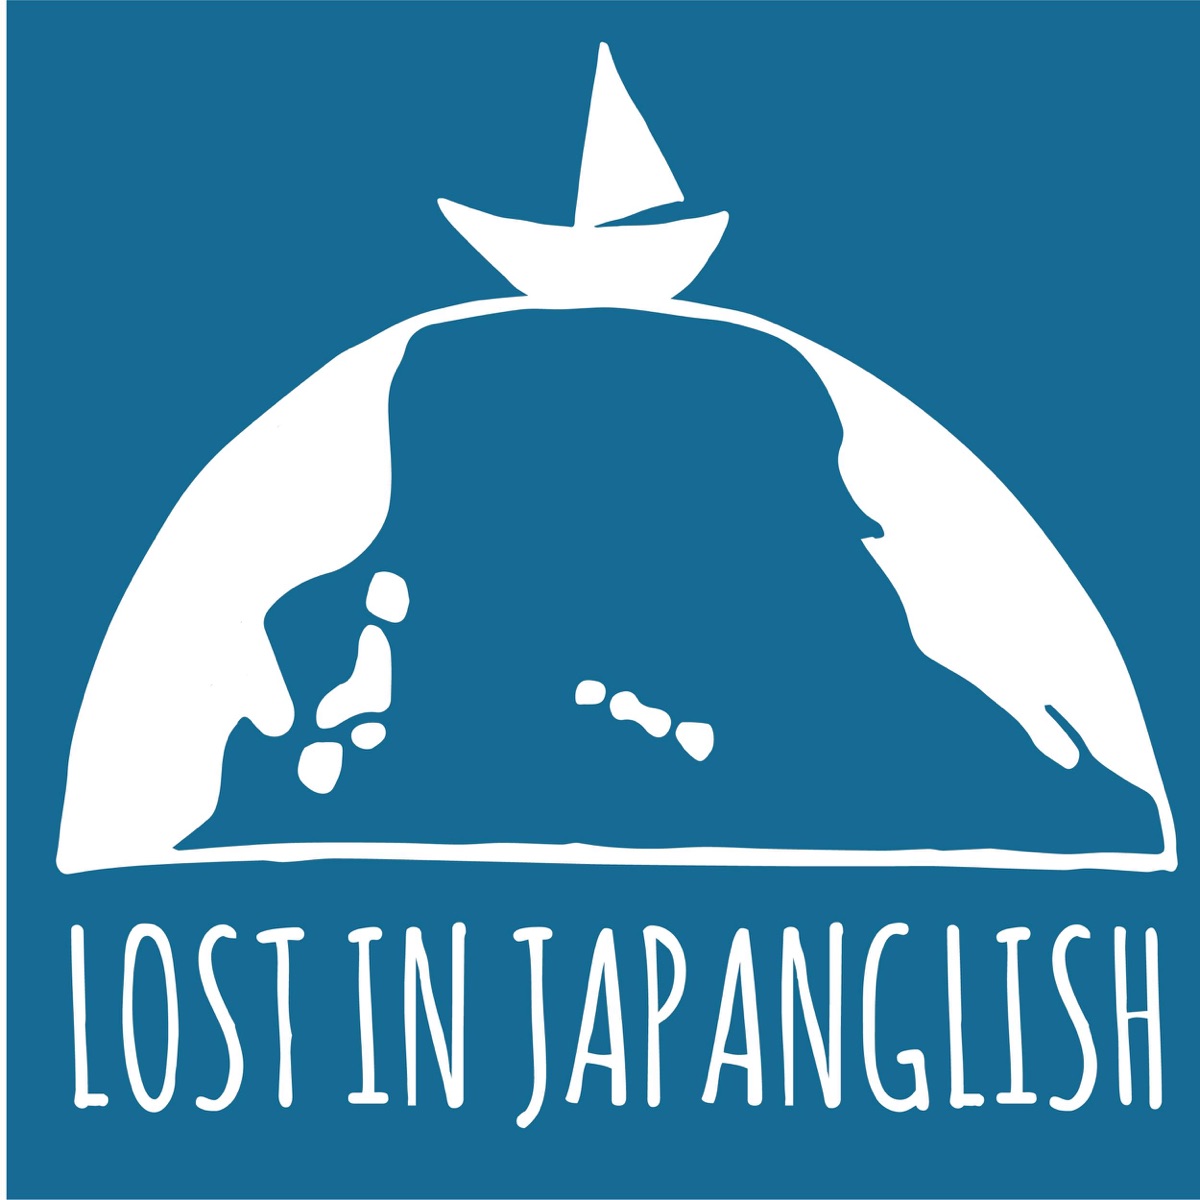 Lost In Japanglish Podcast ロスジャパ Podcast Podtail